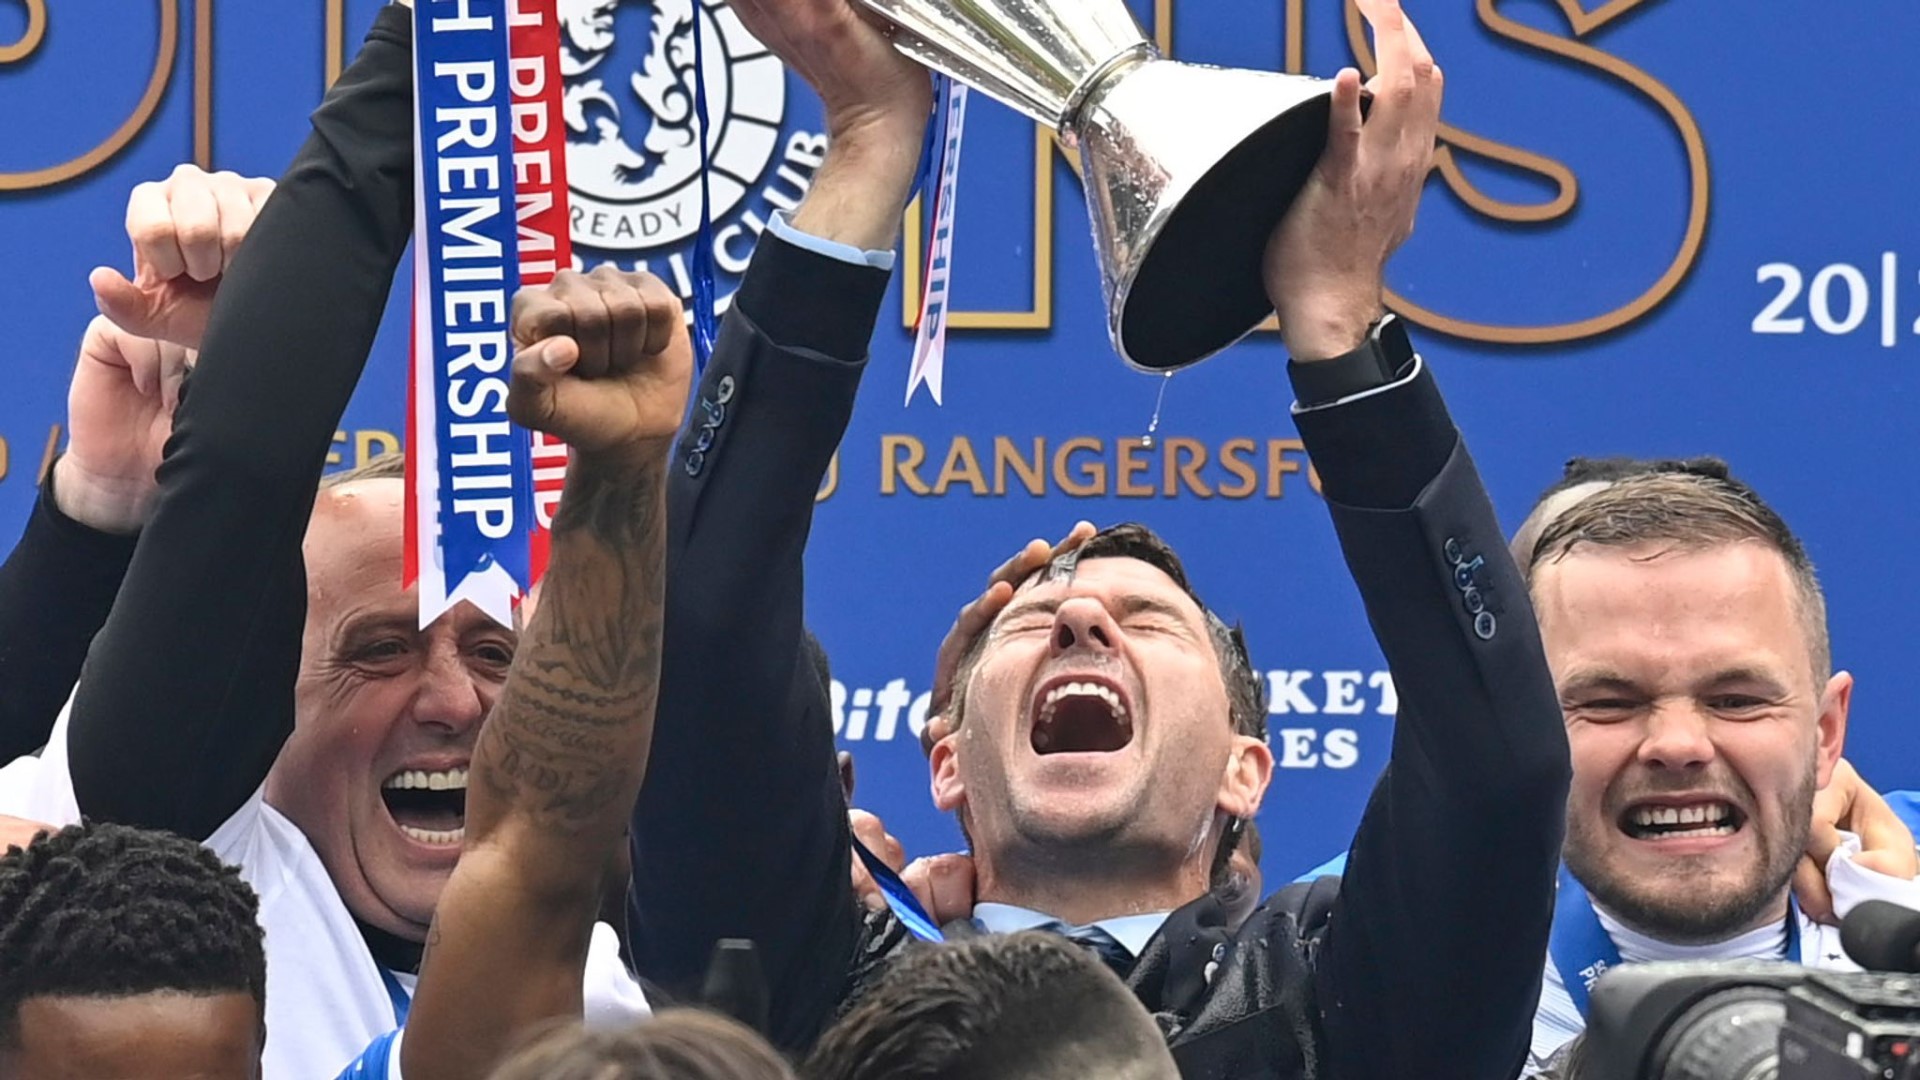 Rangers win the title